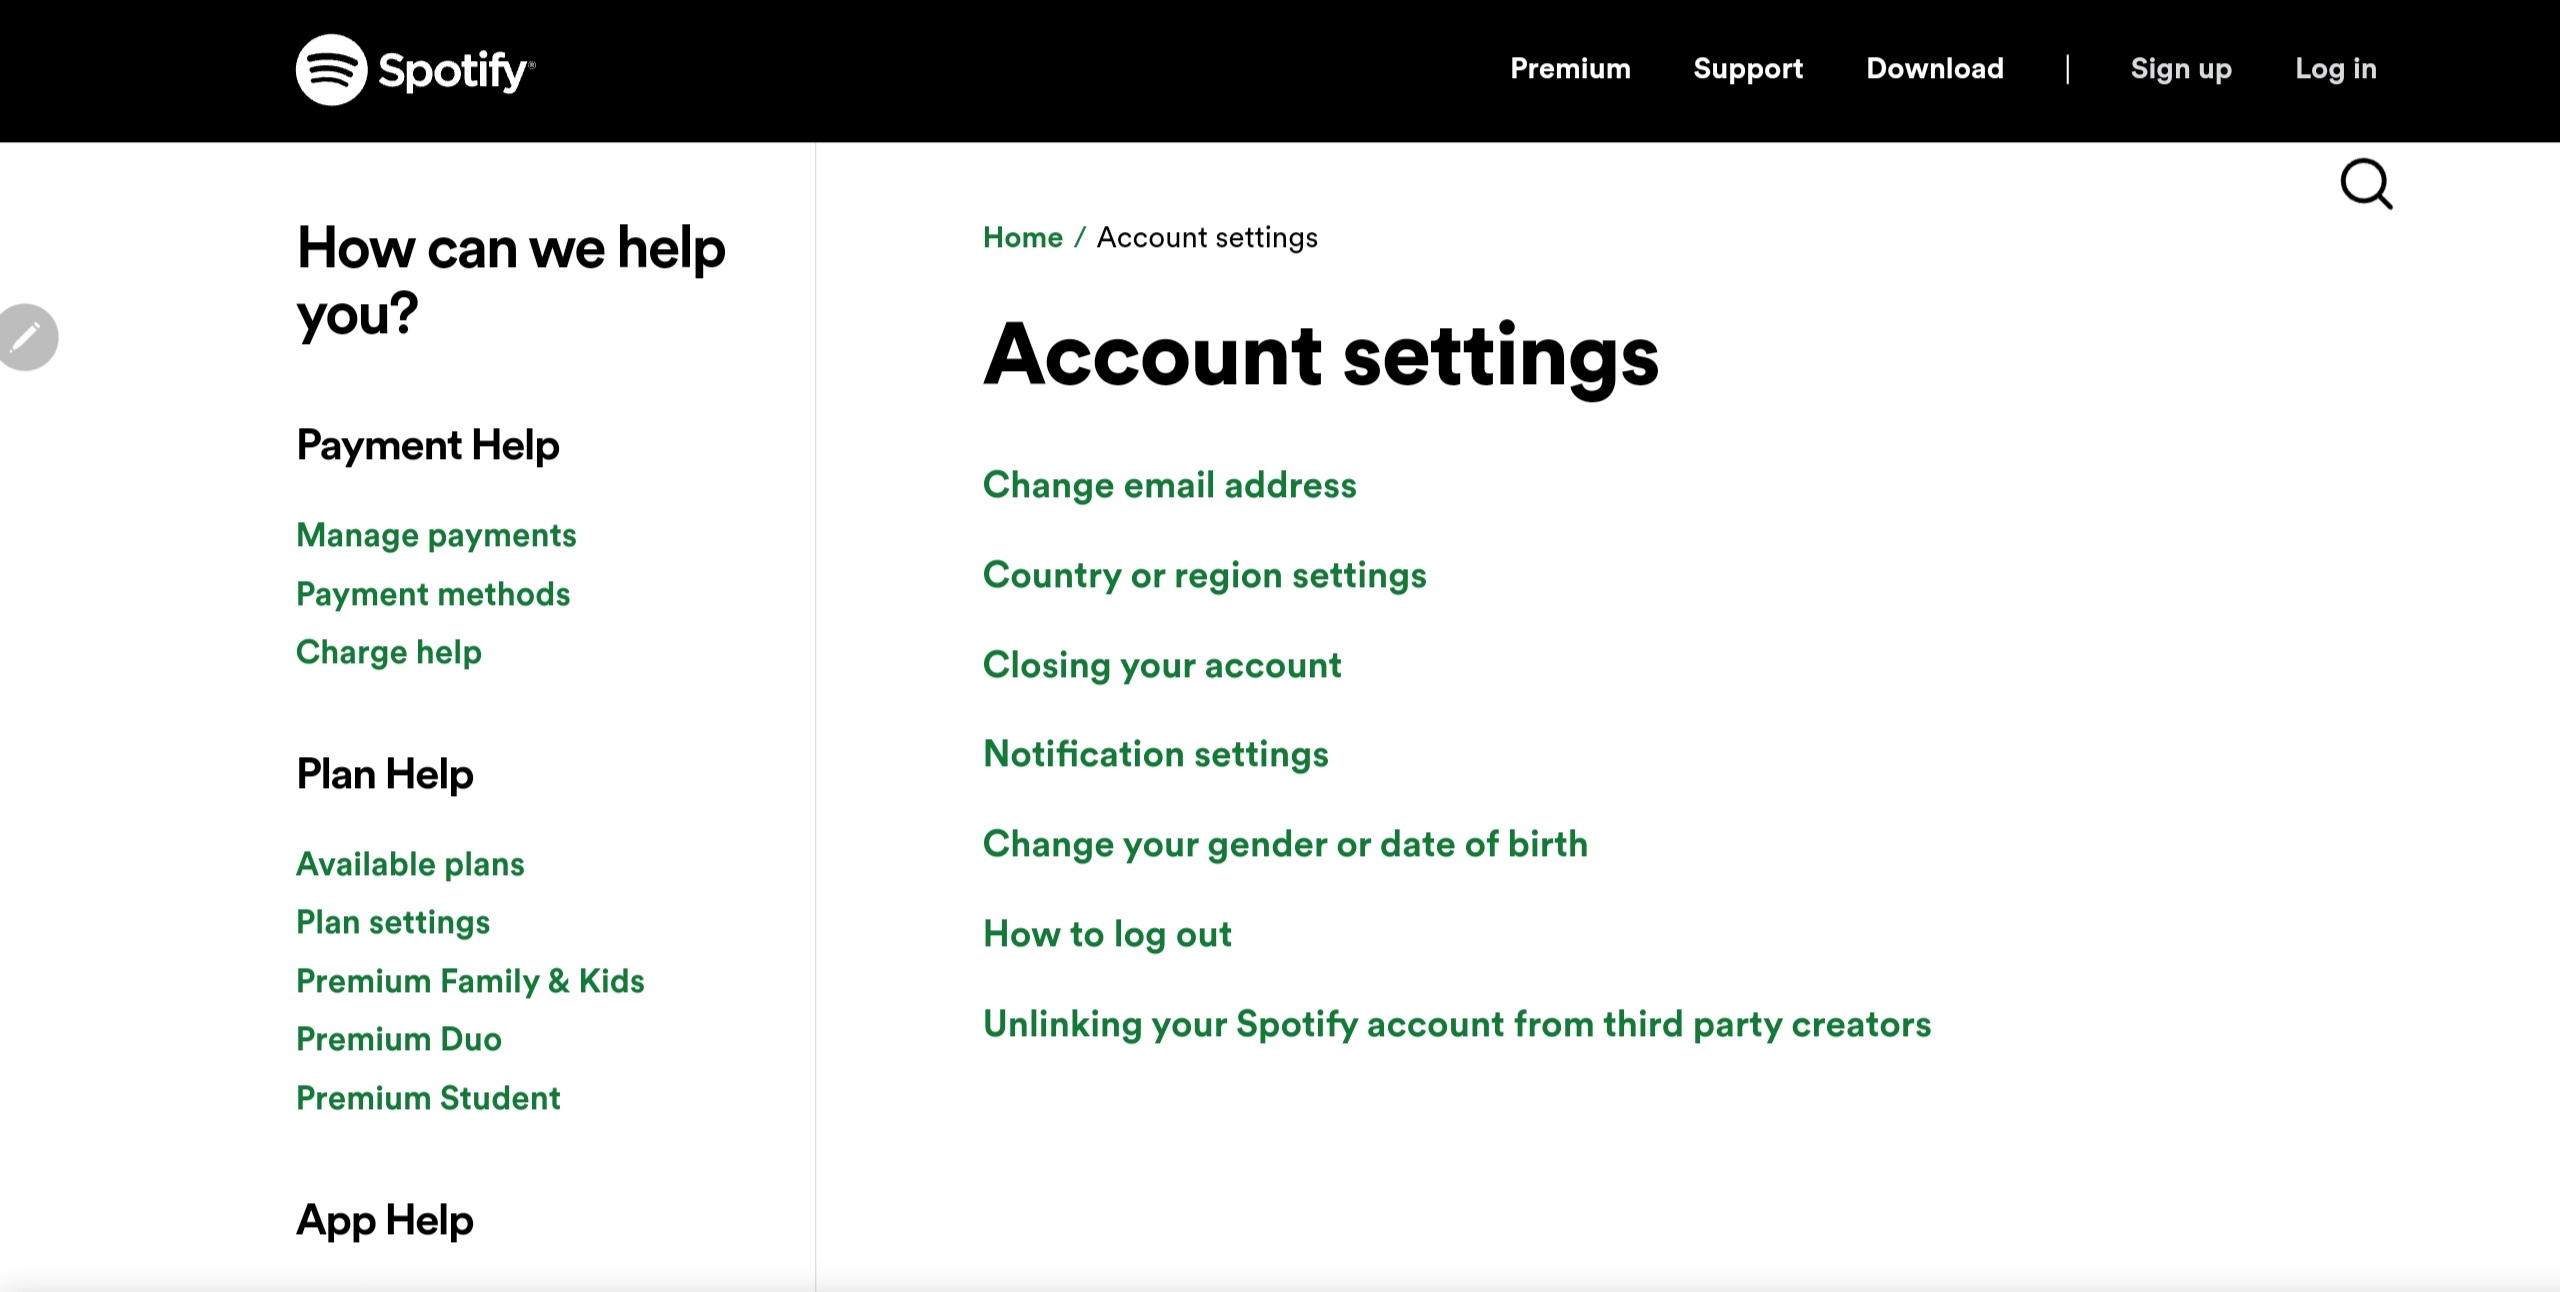 How To Delete Spotify Account?